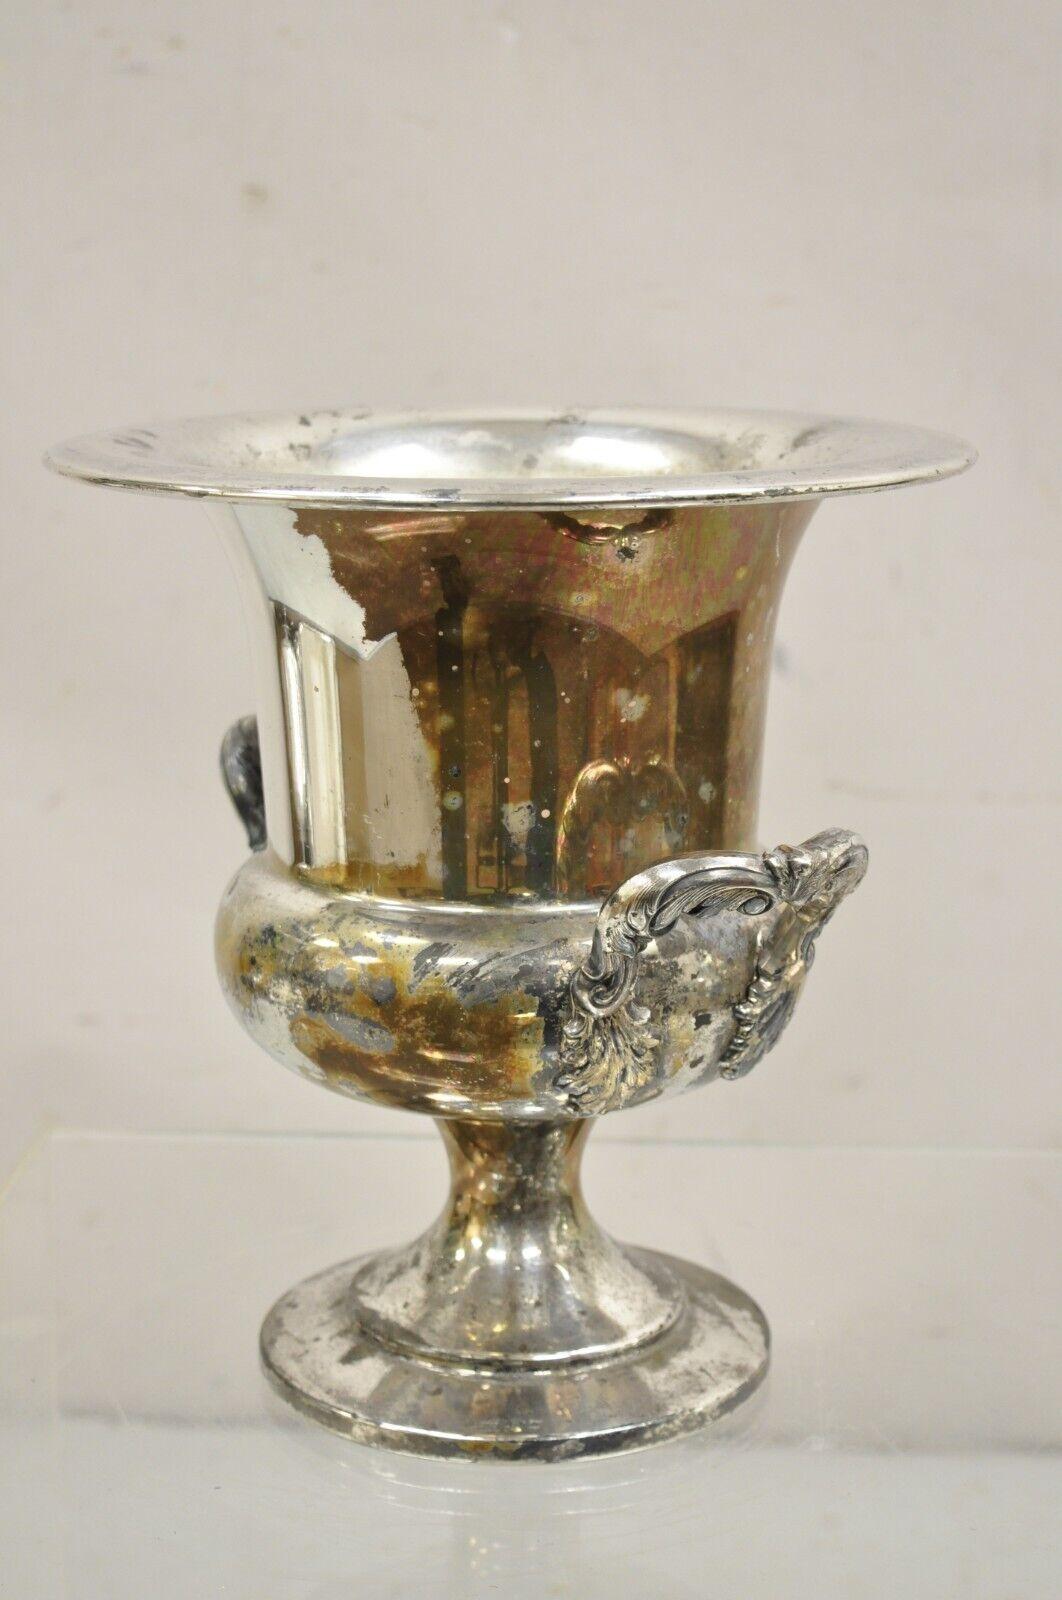 Vintage Distressed Trophy Cup Silver Plated Champagne Chiller Ice Bucket by Bristol. Circa Mid 20th Century. Measurements: 10